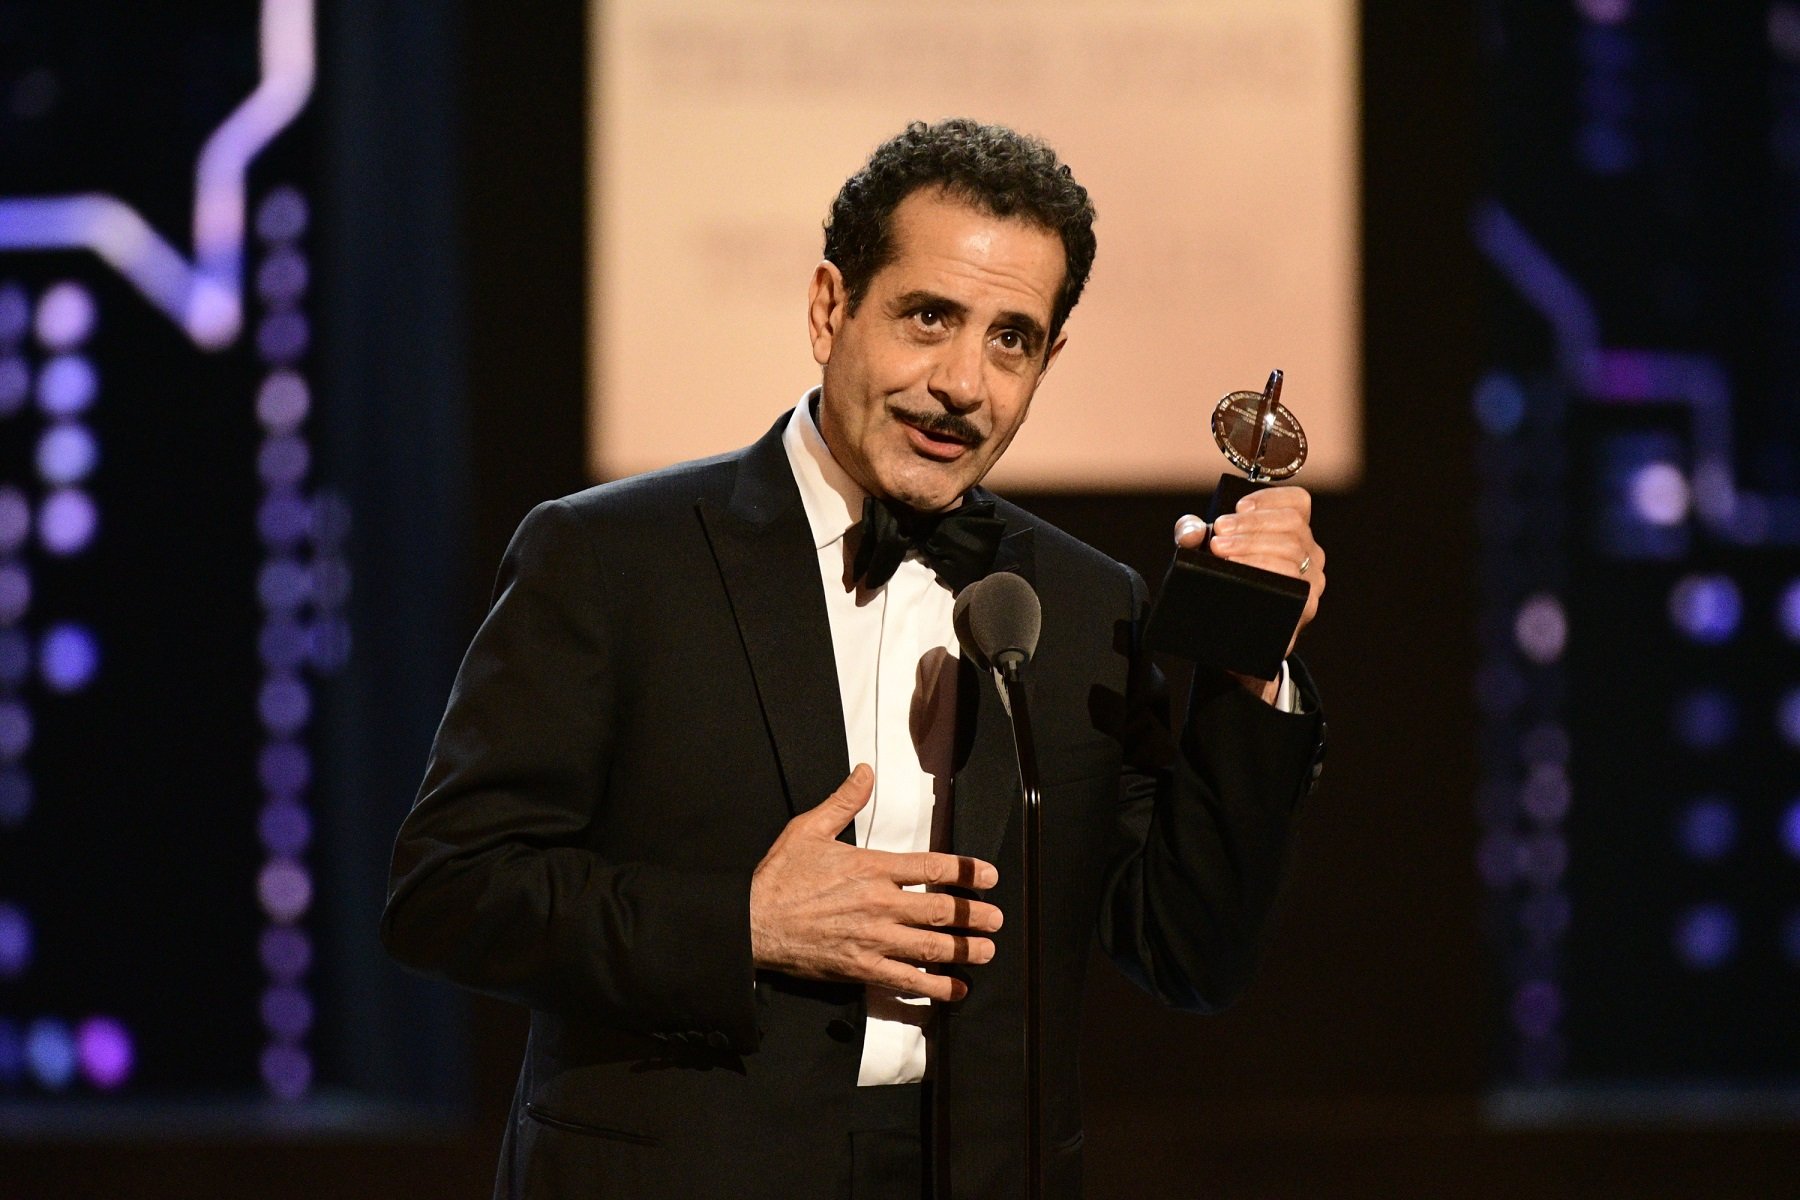 Tony Shalhoub on stage at the 2018 Tony Awards accepting an award for 'The Band's Visit'